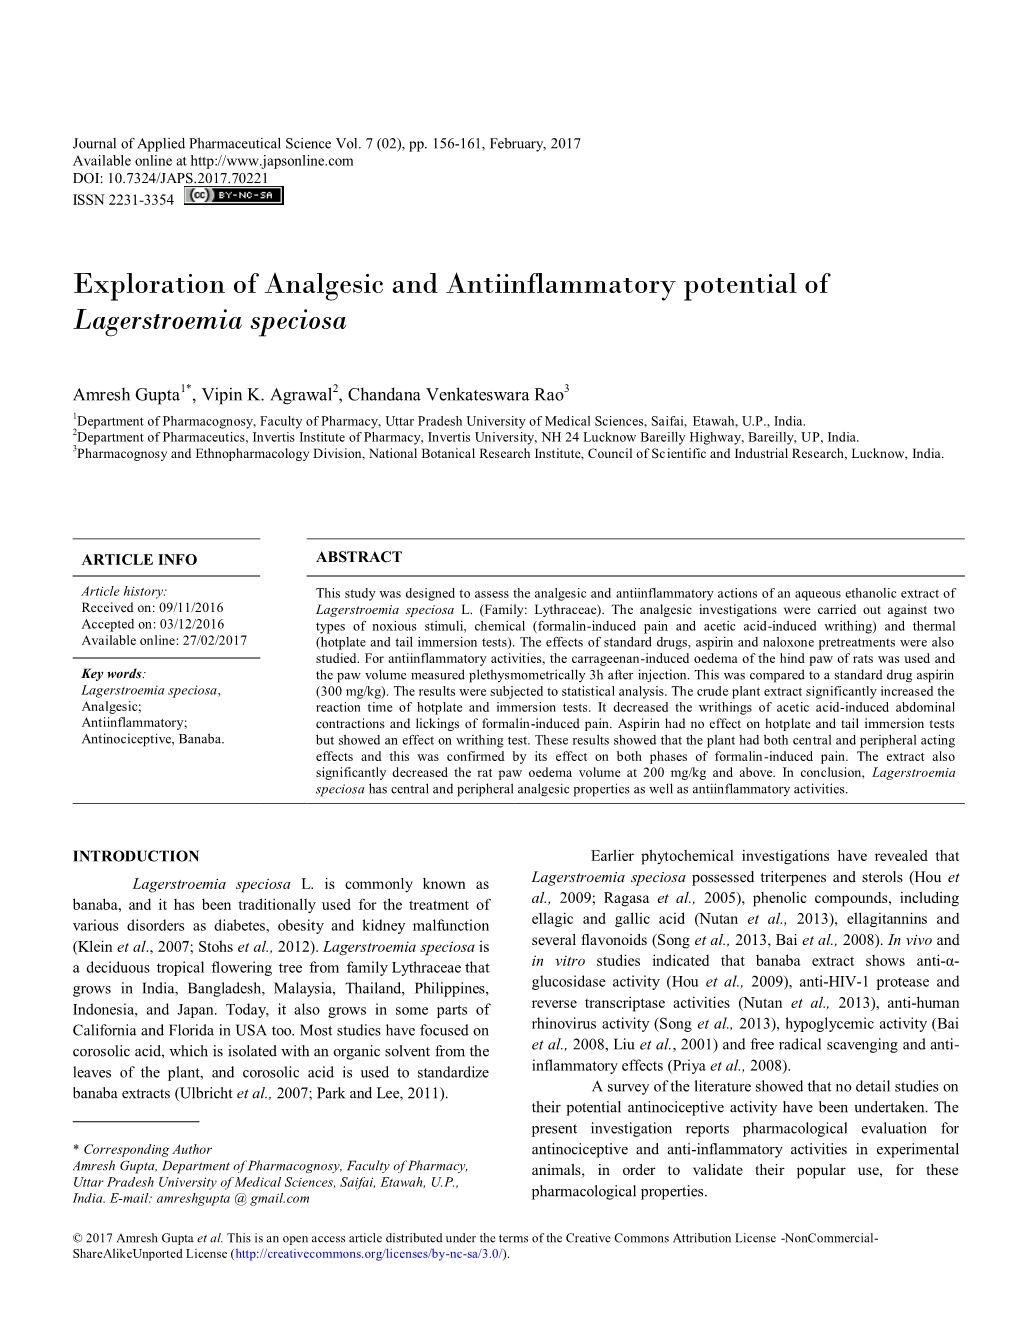 Exploration of Analgesic and Antiinflammatory Potential of Lagerstroemia Speciosa